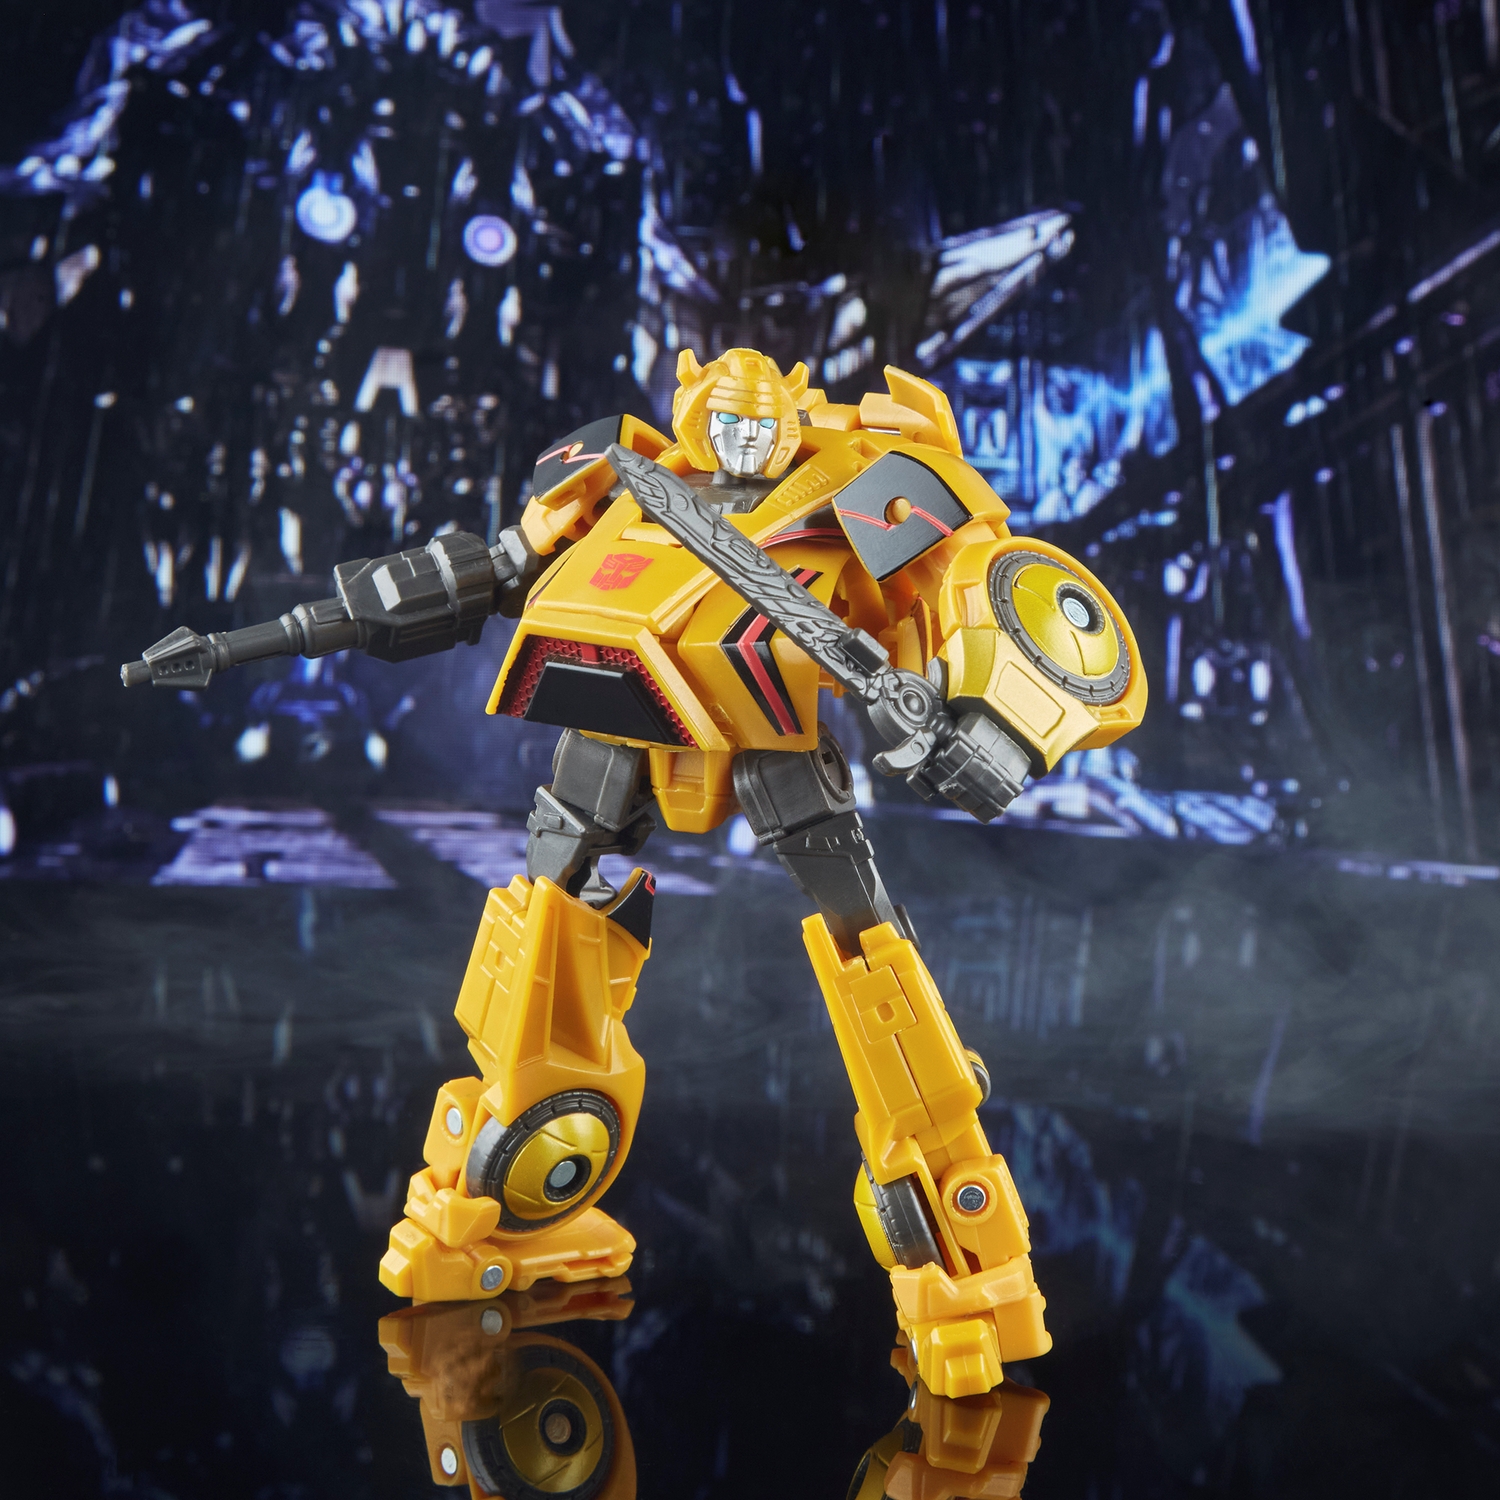 F7235_DIO_TRA_SS_GAMEREDITION_BUMBLEBEE_0002_2000 - Copy.jpg